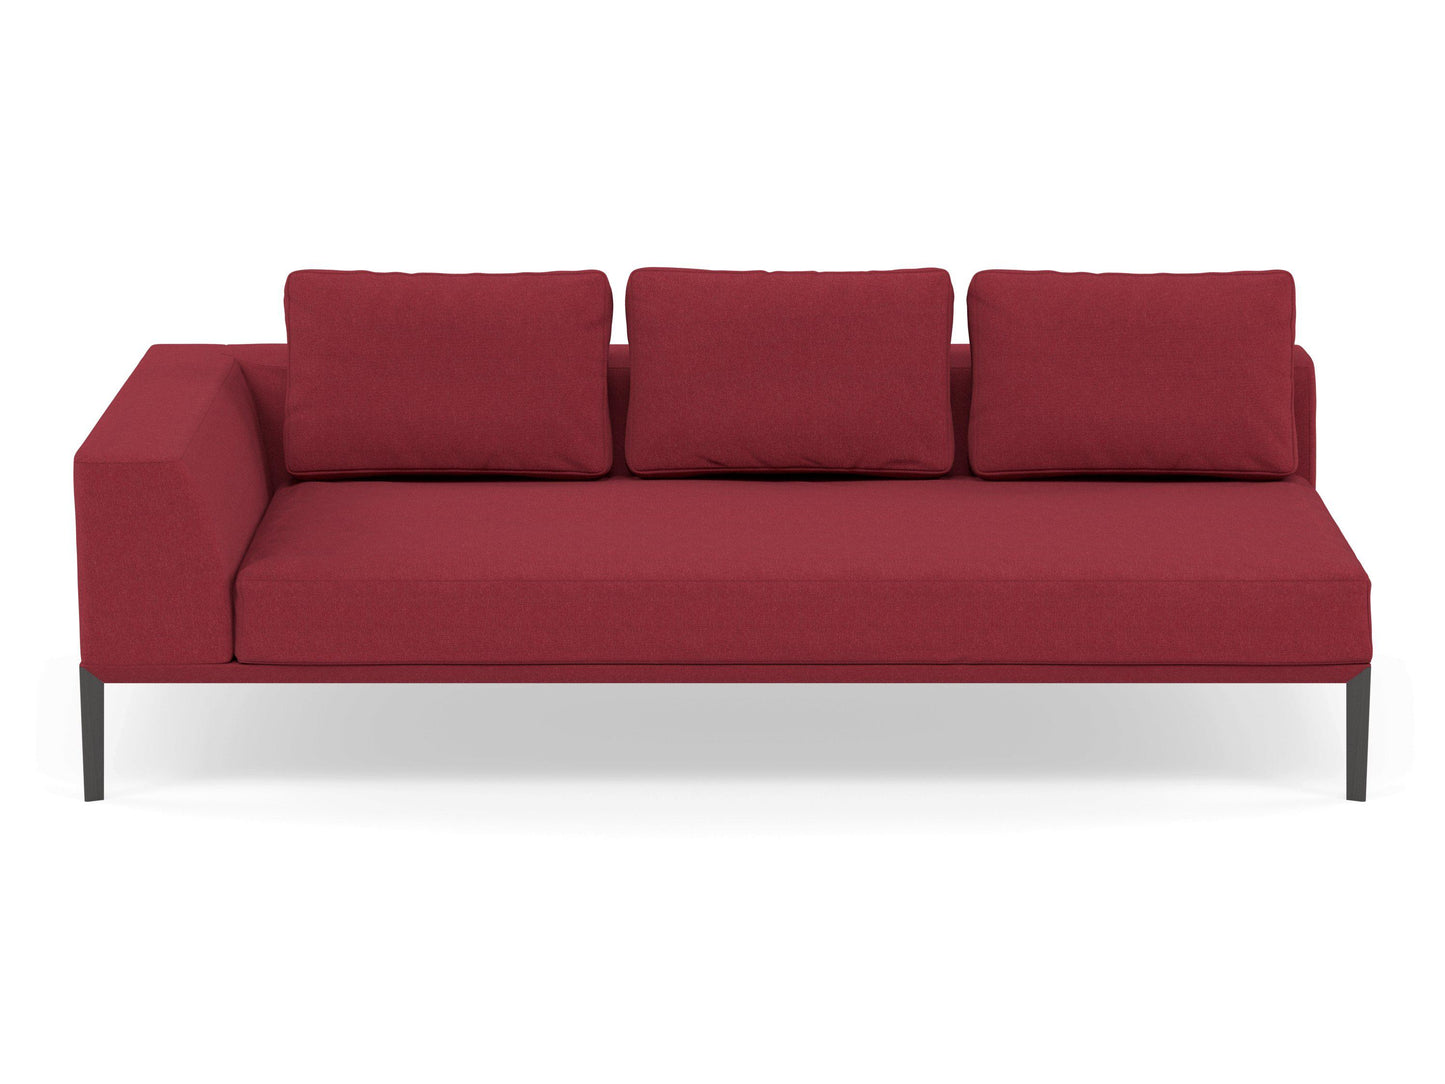 Modern 3 Seater Chaise Lounge Style Sofa with Right Armrest in Rasberry Red Fabric-Wenge Oak-Distinct Designs (London) Ltd